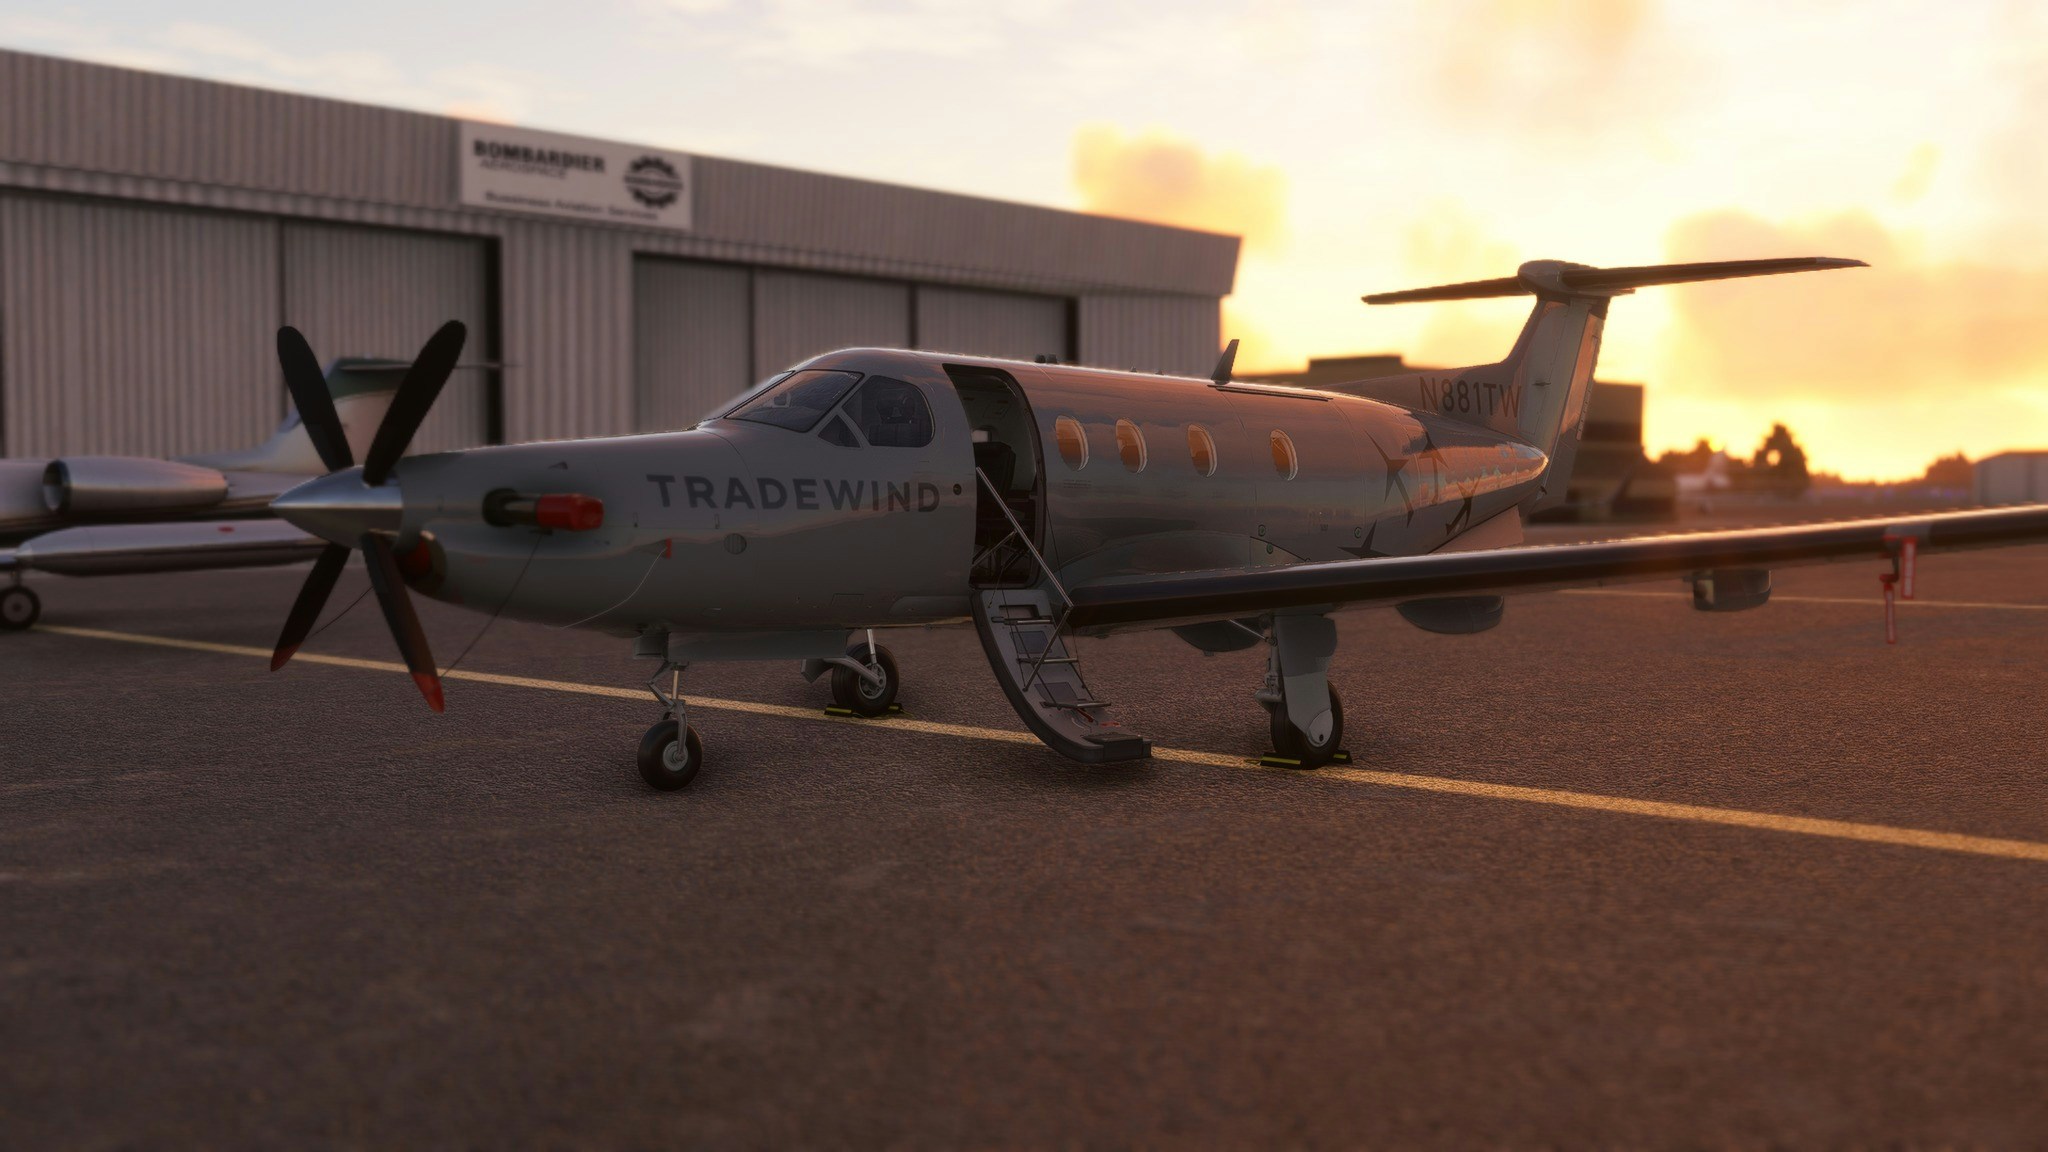 SimWorks Studios Sending their PC-12 To Pilatus for Approval Before Release